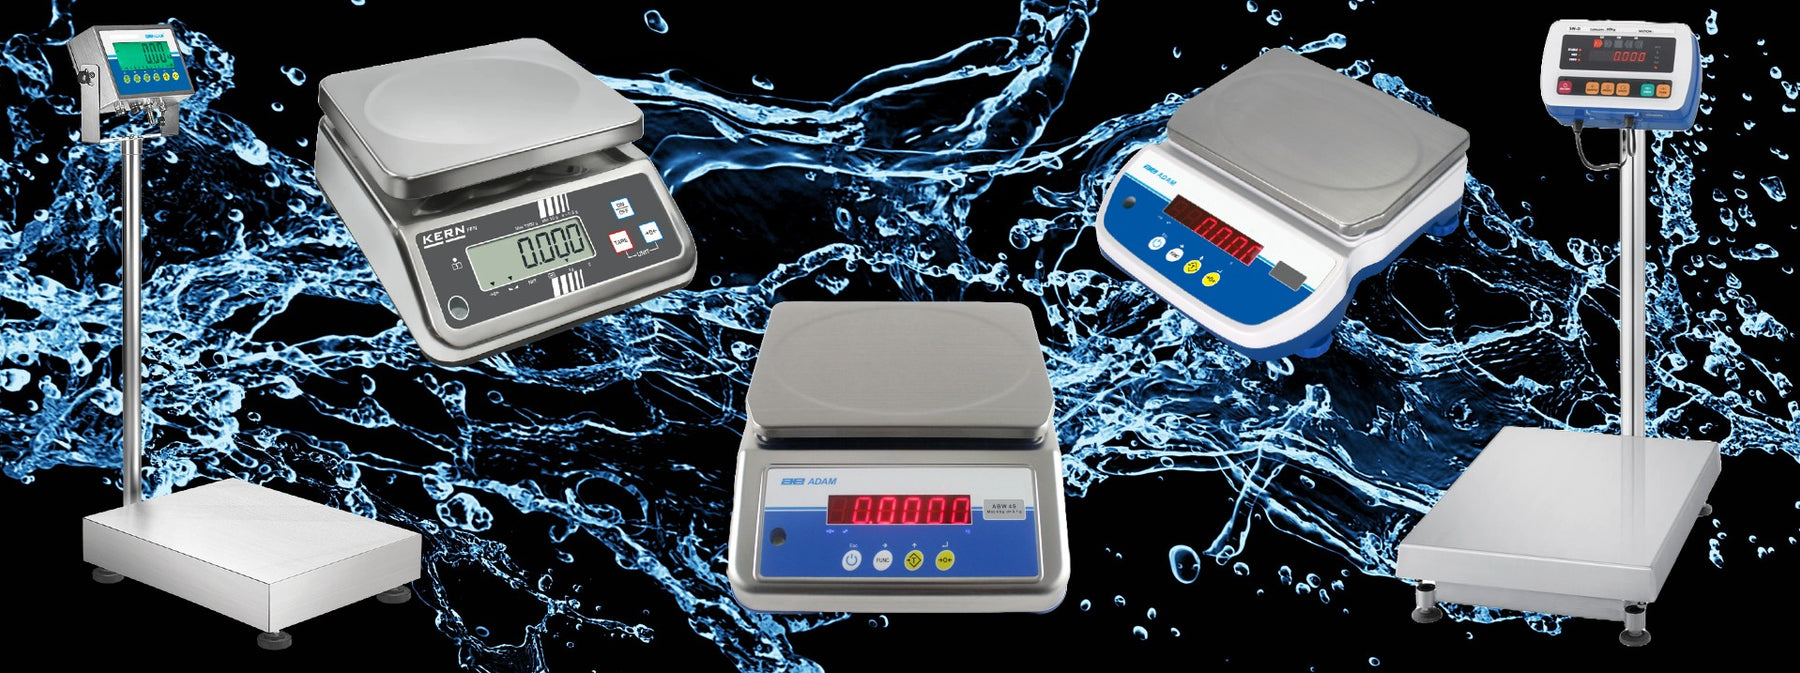 Washdown Scales vs Waterproof Scales: What’s the Difference?